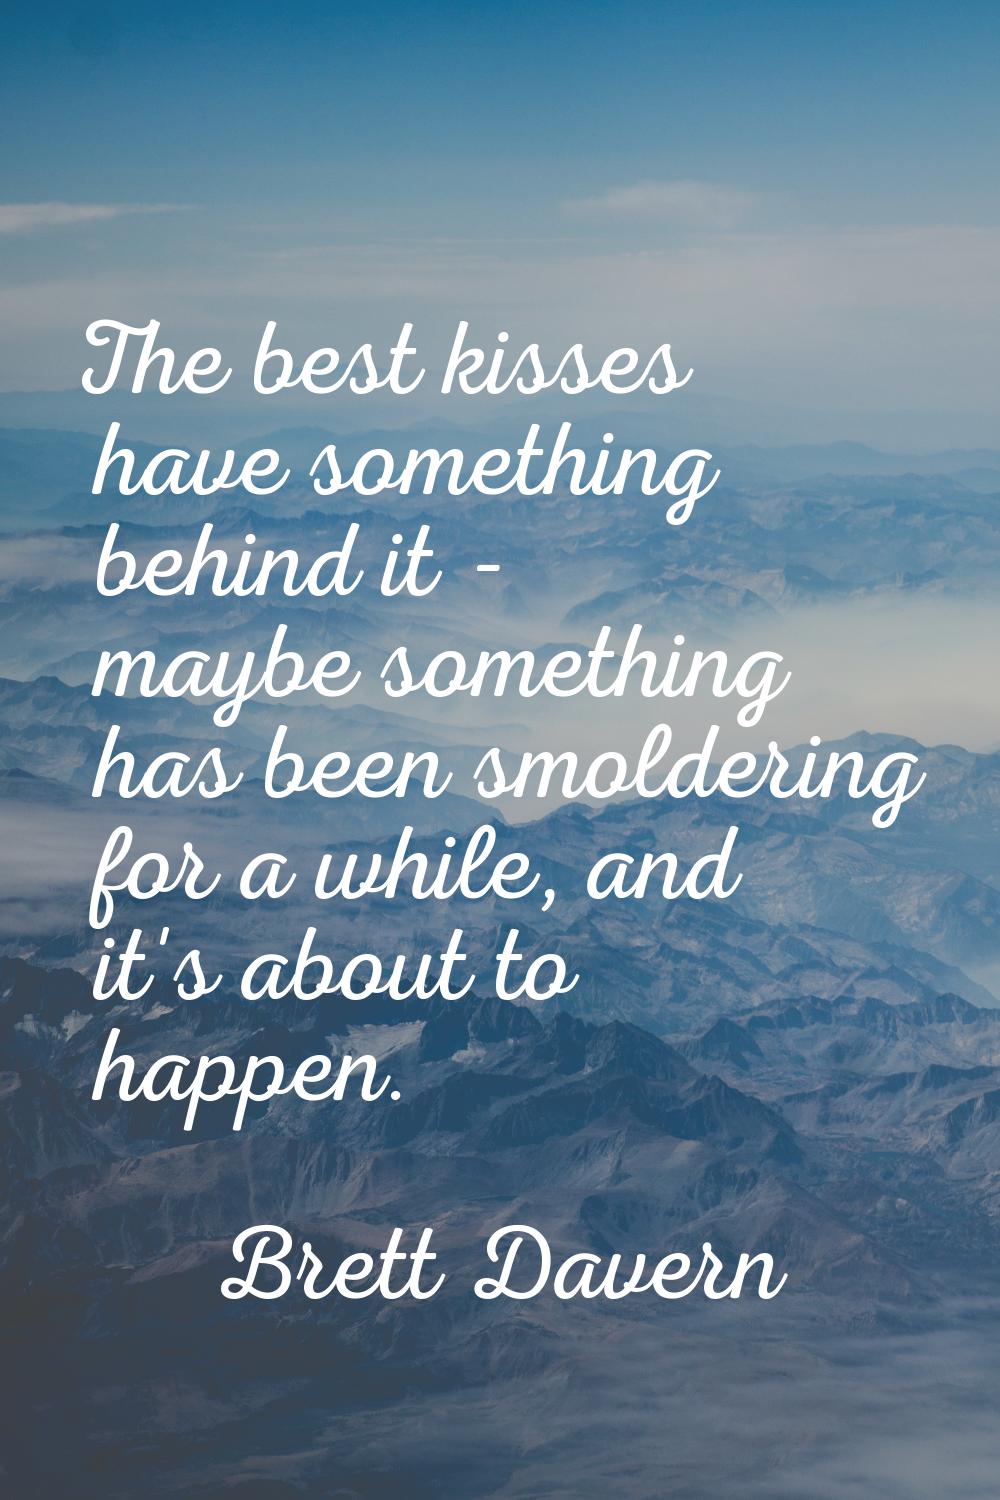 The best kisses have something behind it - maybe something has been smoldering for a while, and it'